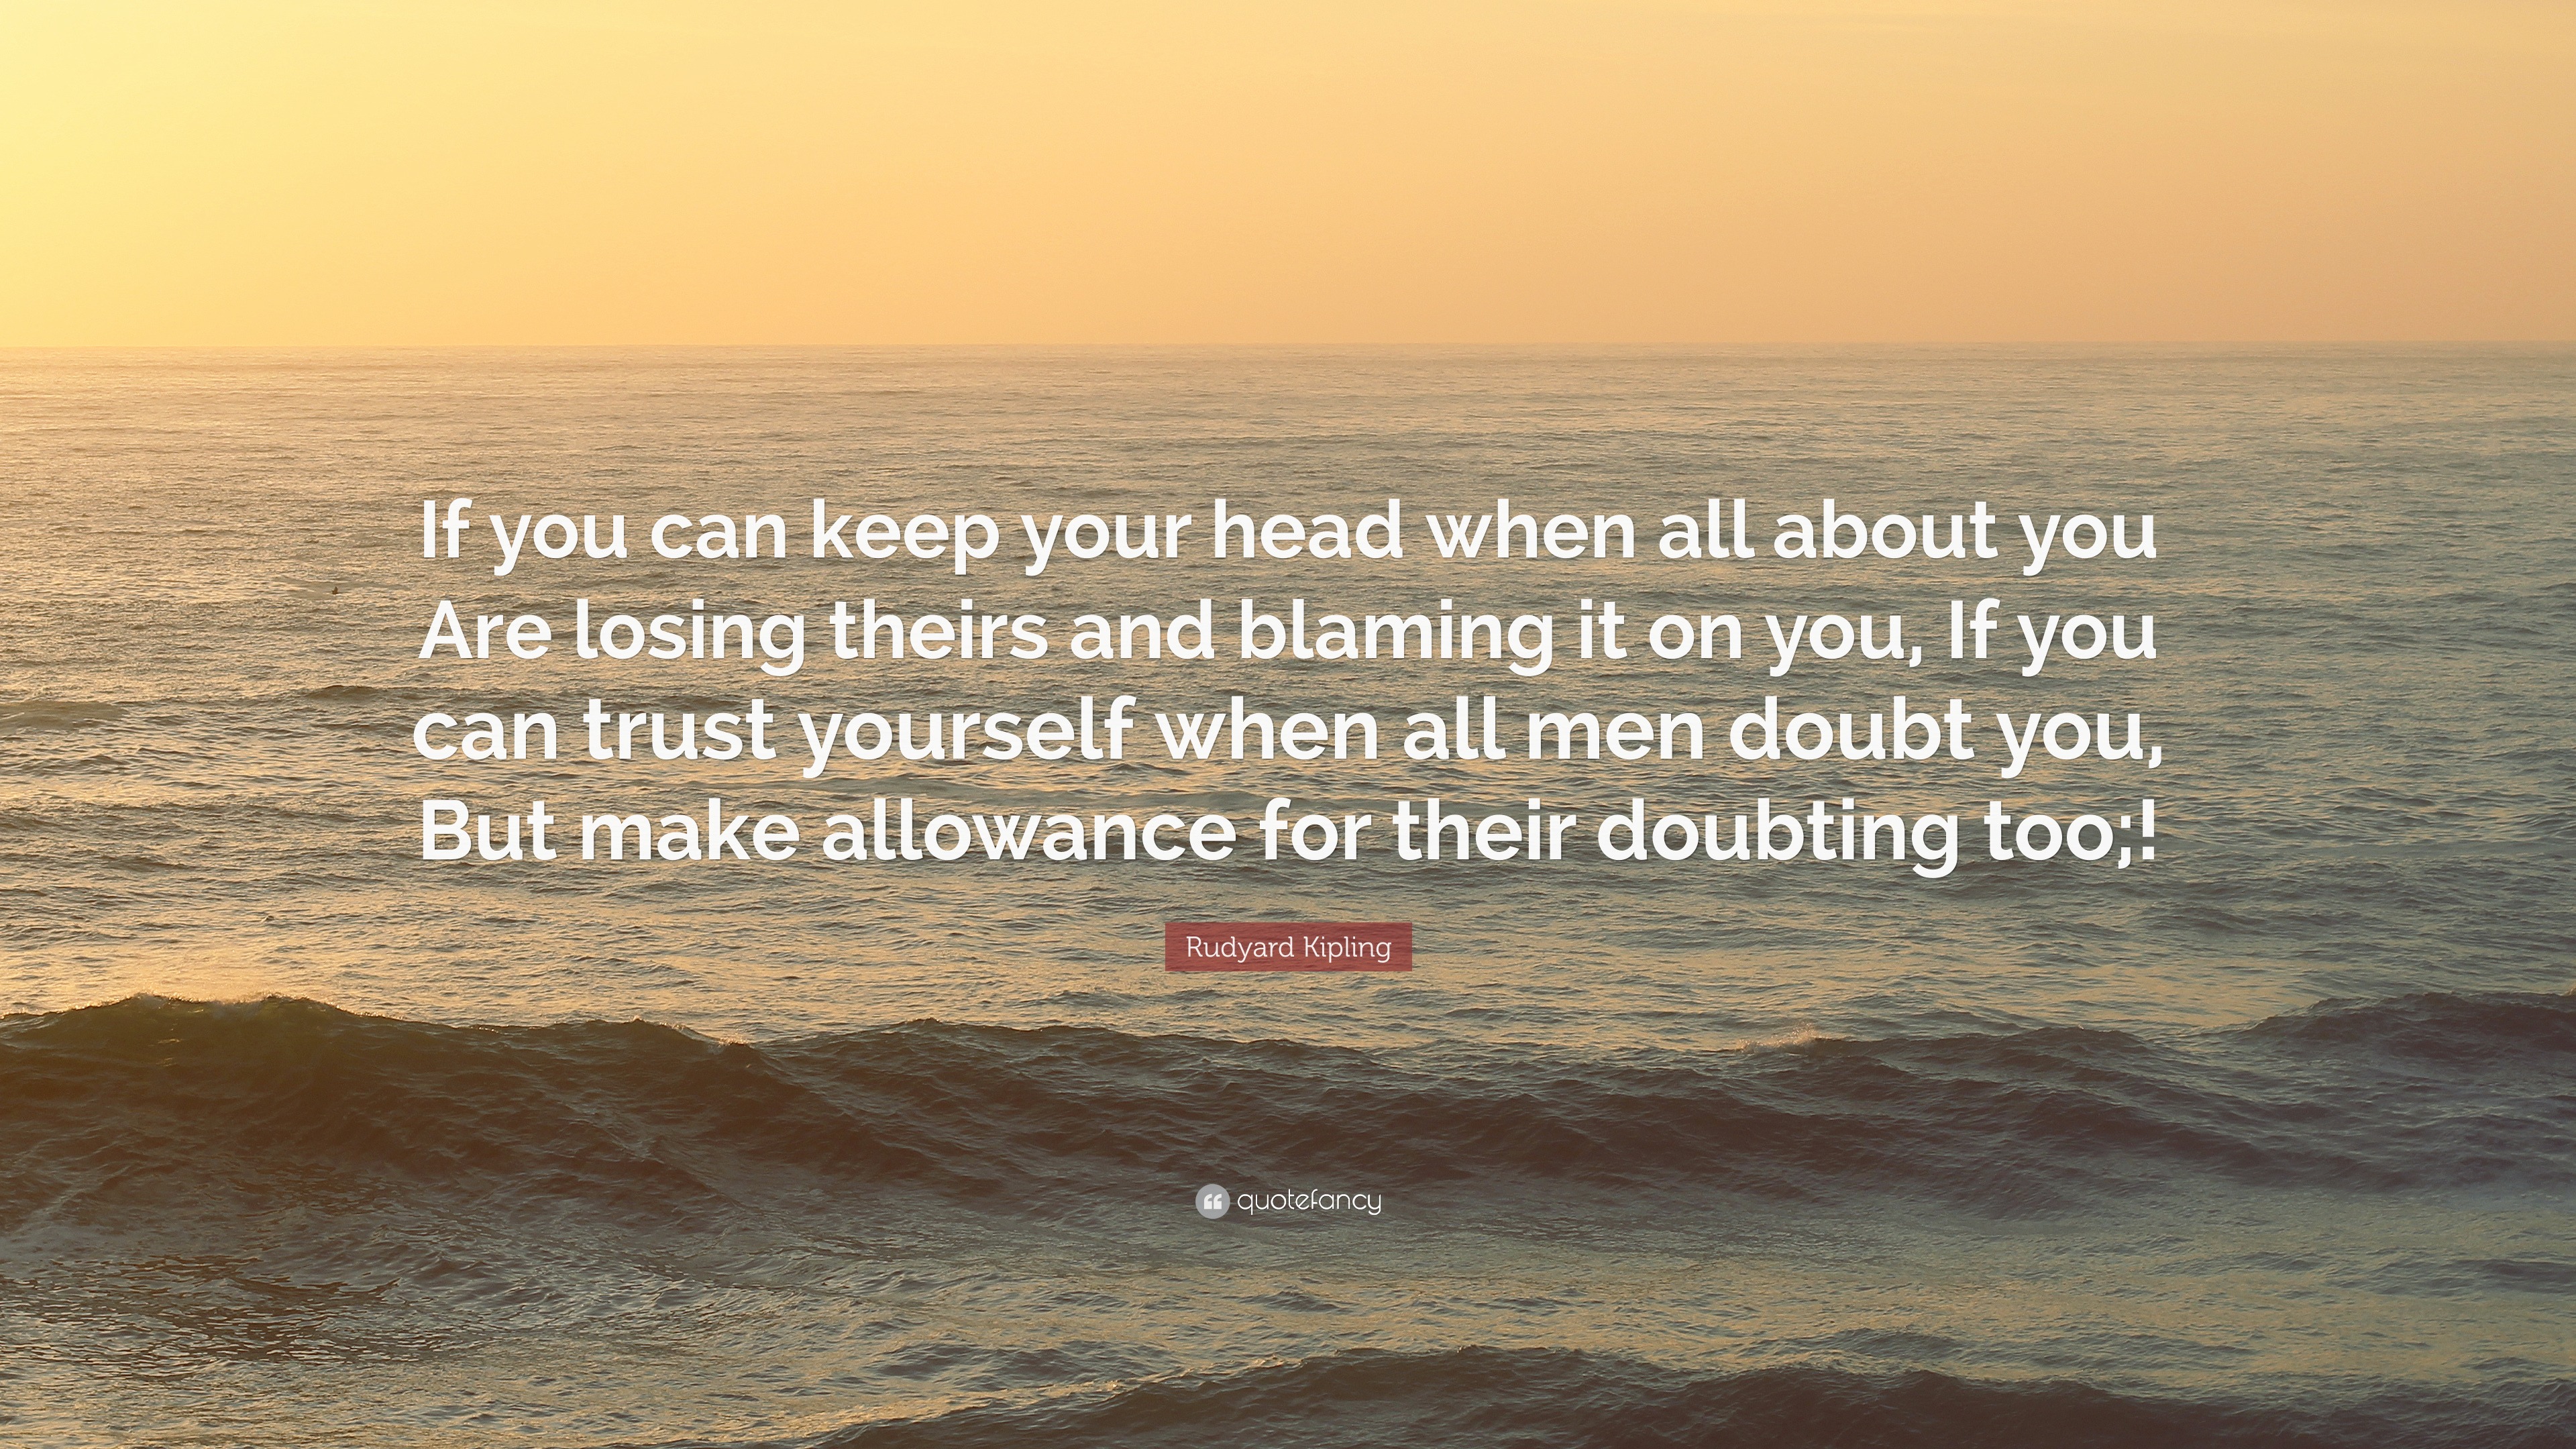 Rudyard Kipling Quote: “If you can keep your head when all about you Are  losing theirs and blaming it on you, If you can trust yourself when all...”